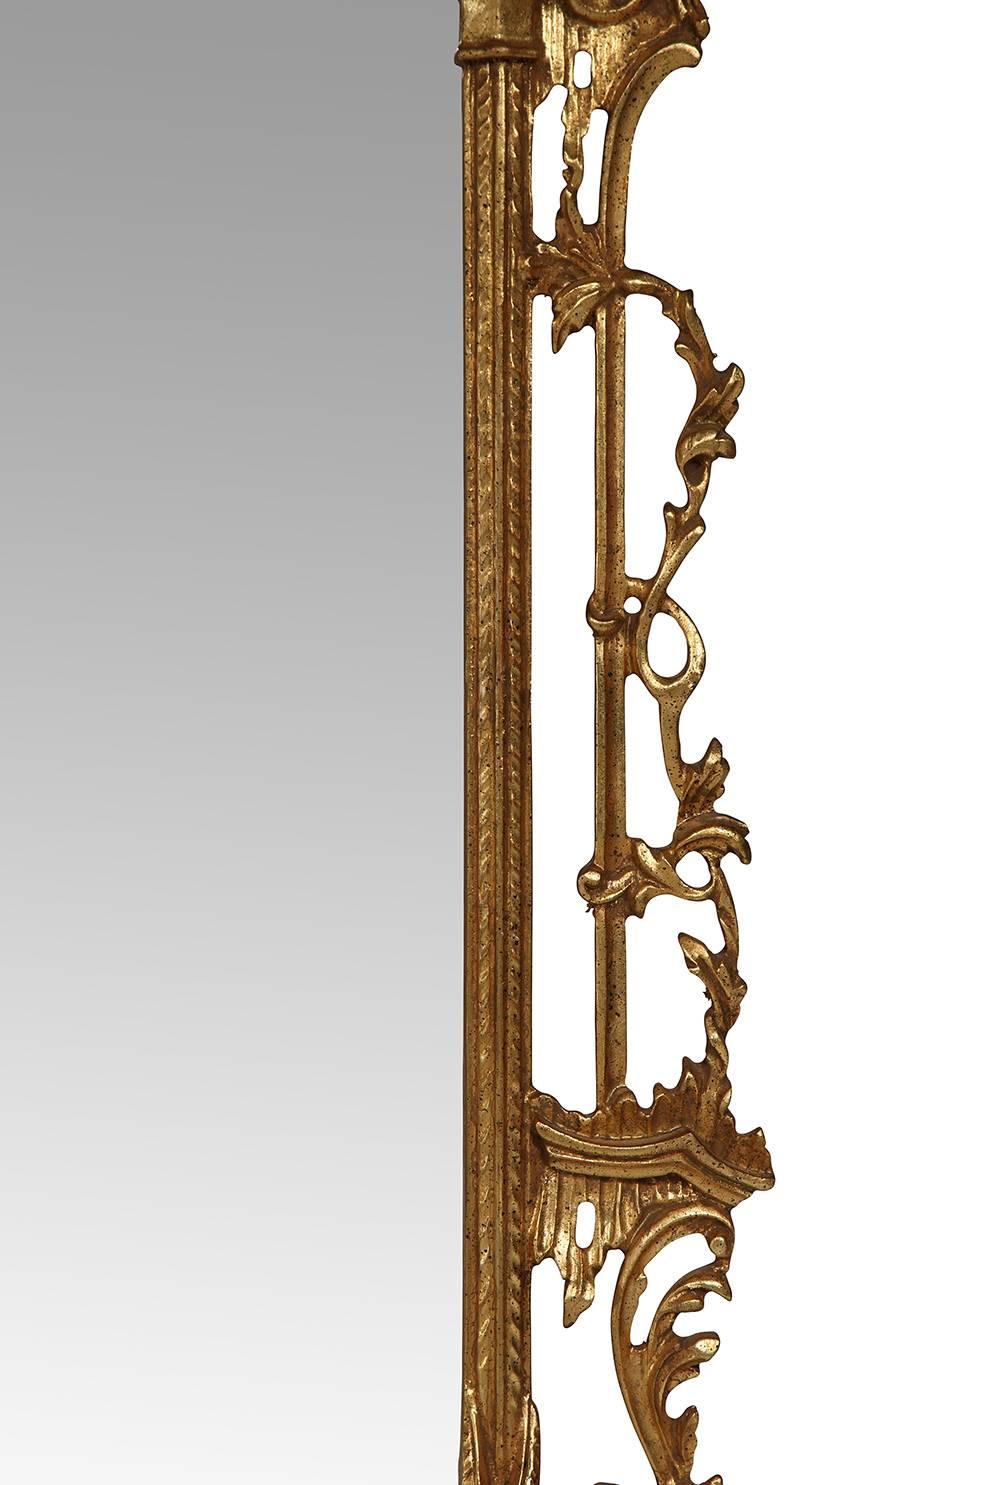 Vintage Italian gilt Chippendale mirror adorned with a finial and five delicate bells. The frame has elaborate scrolled leaf carvings and ornate corners. Hooks on the back for hanging. Marked 